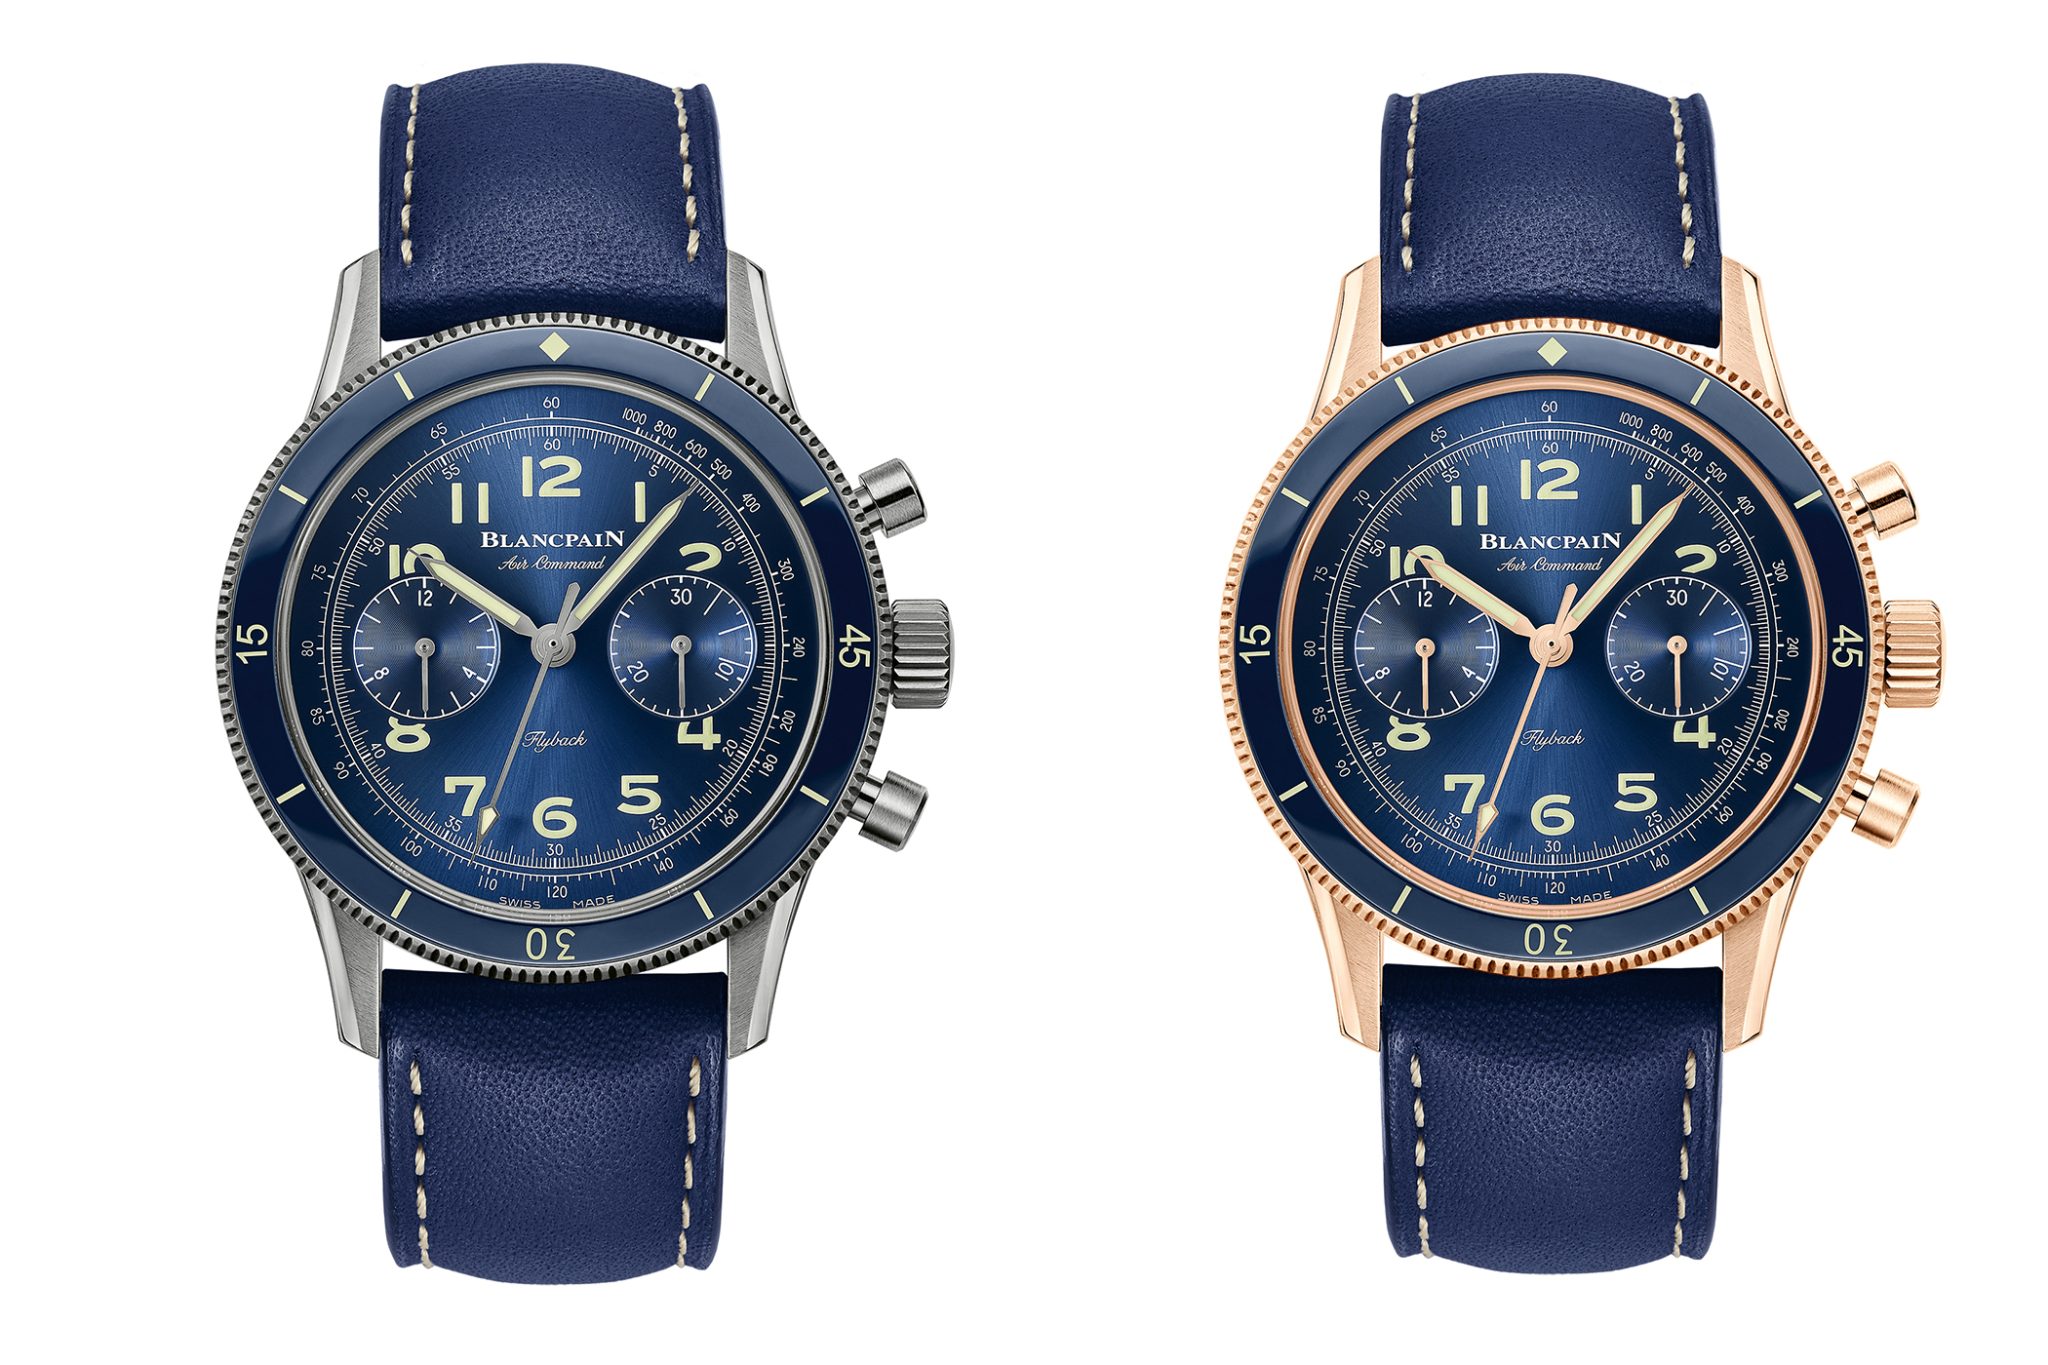 Blancpain-Air-Command-Flyback-Chronograph-Dial-Titanium-Redgold-sidebyside-front